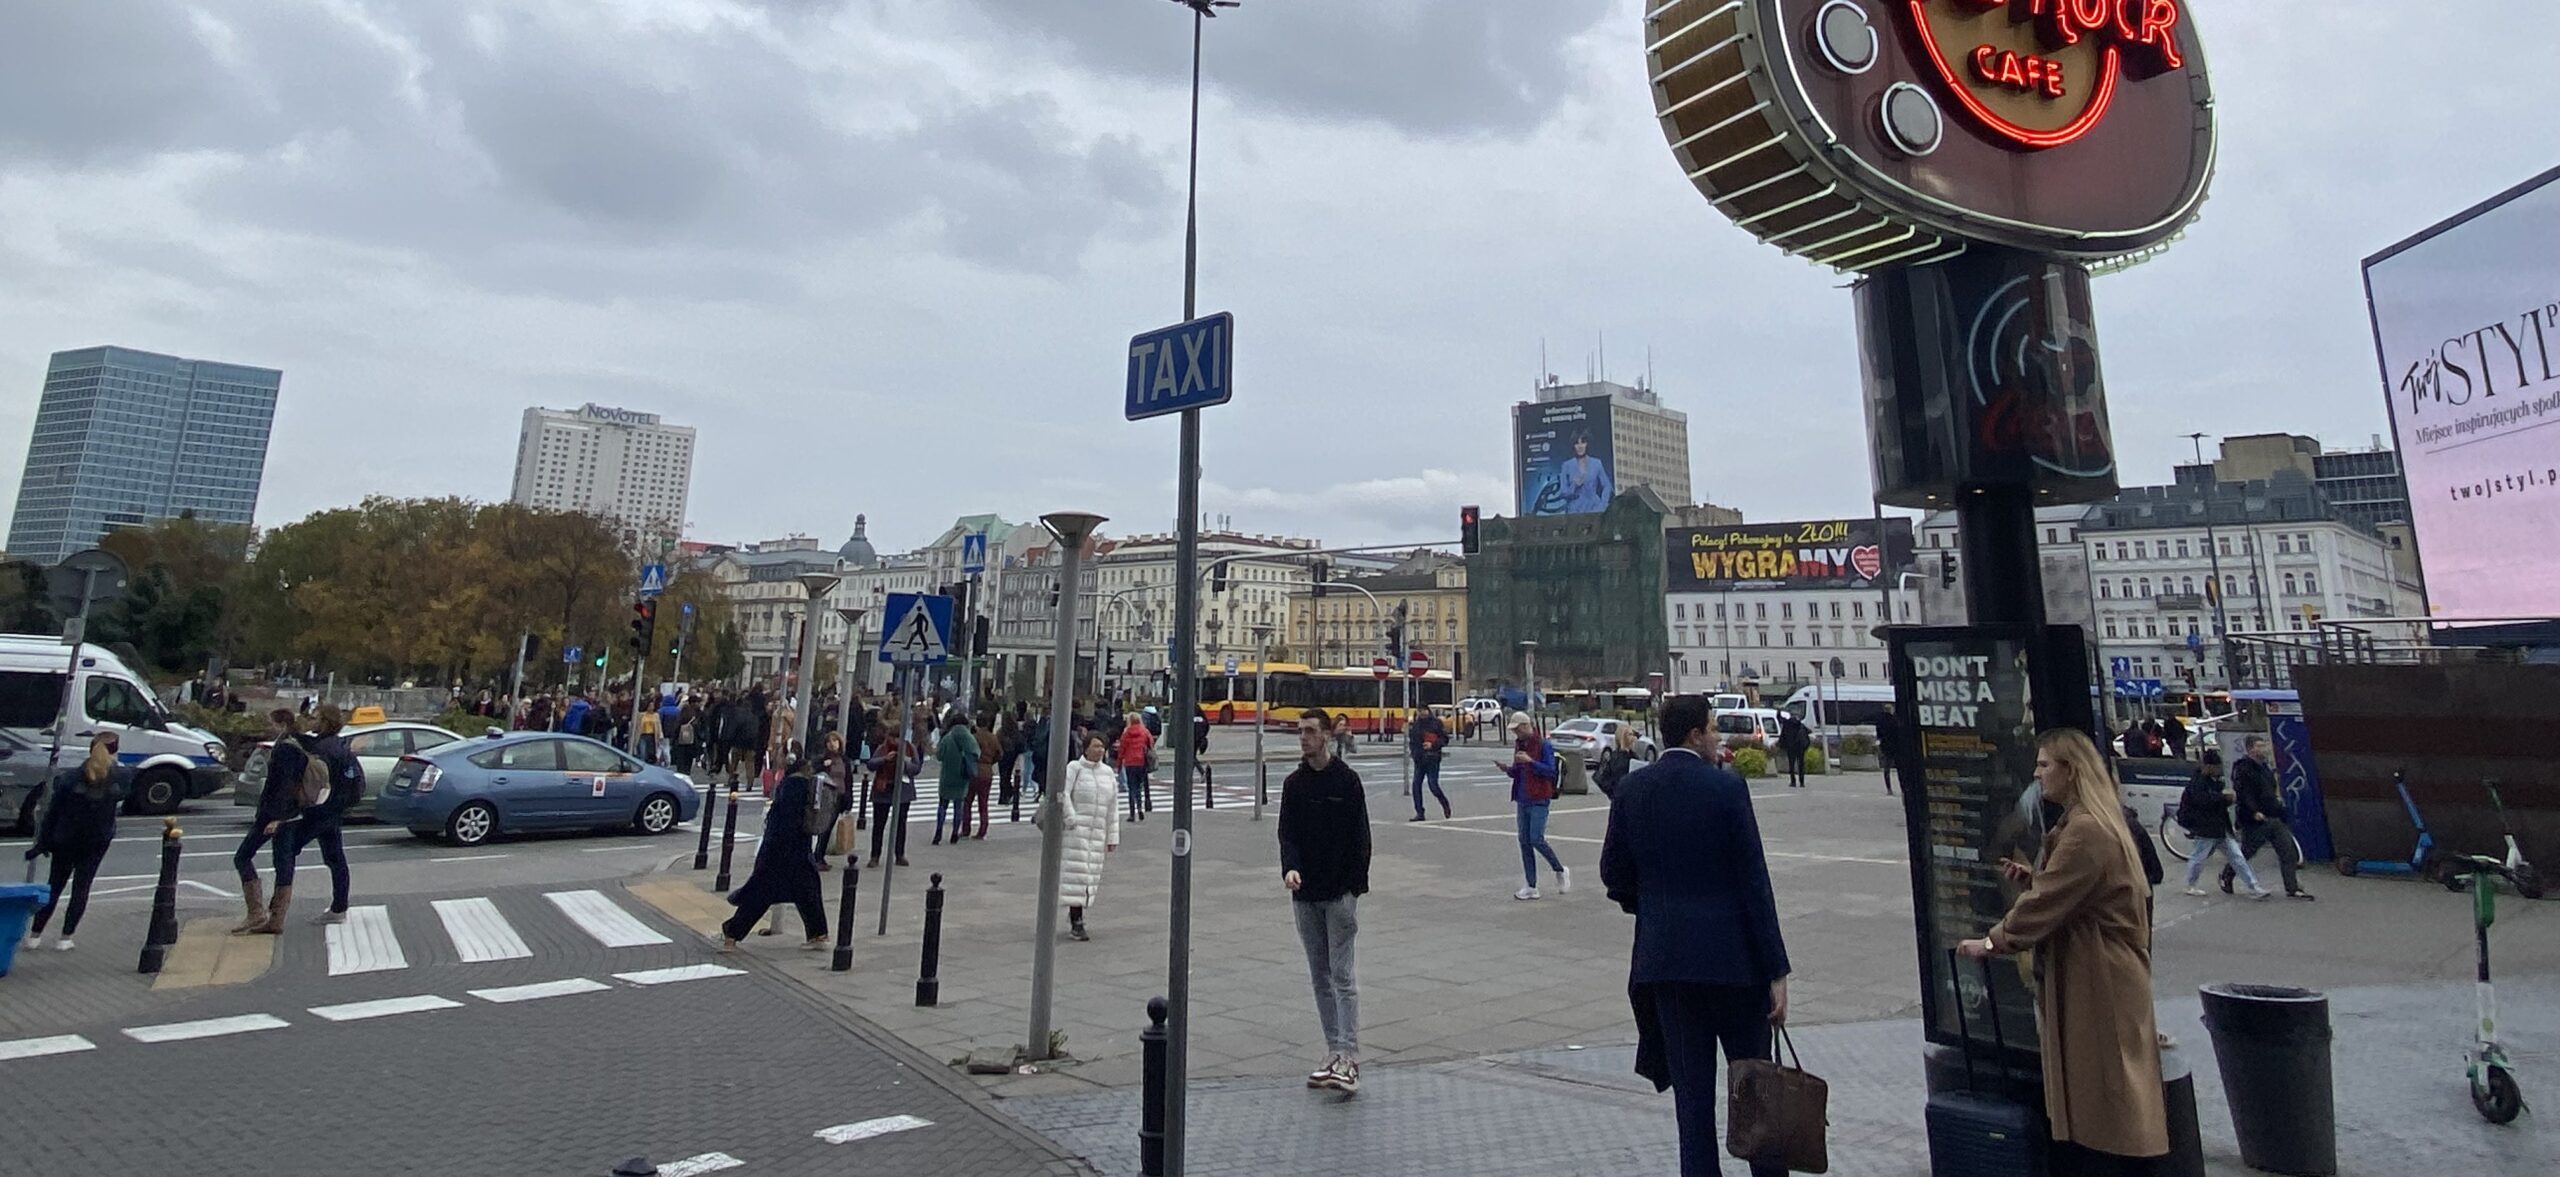 Busy street in central Warsaw, full of cars and pedestrians